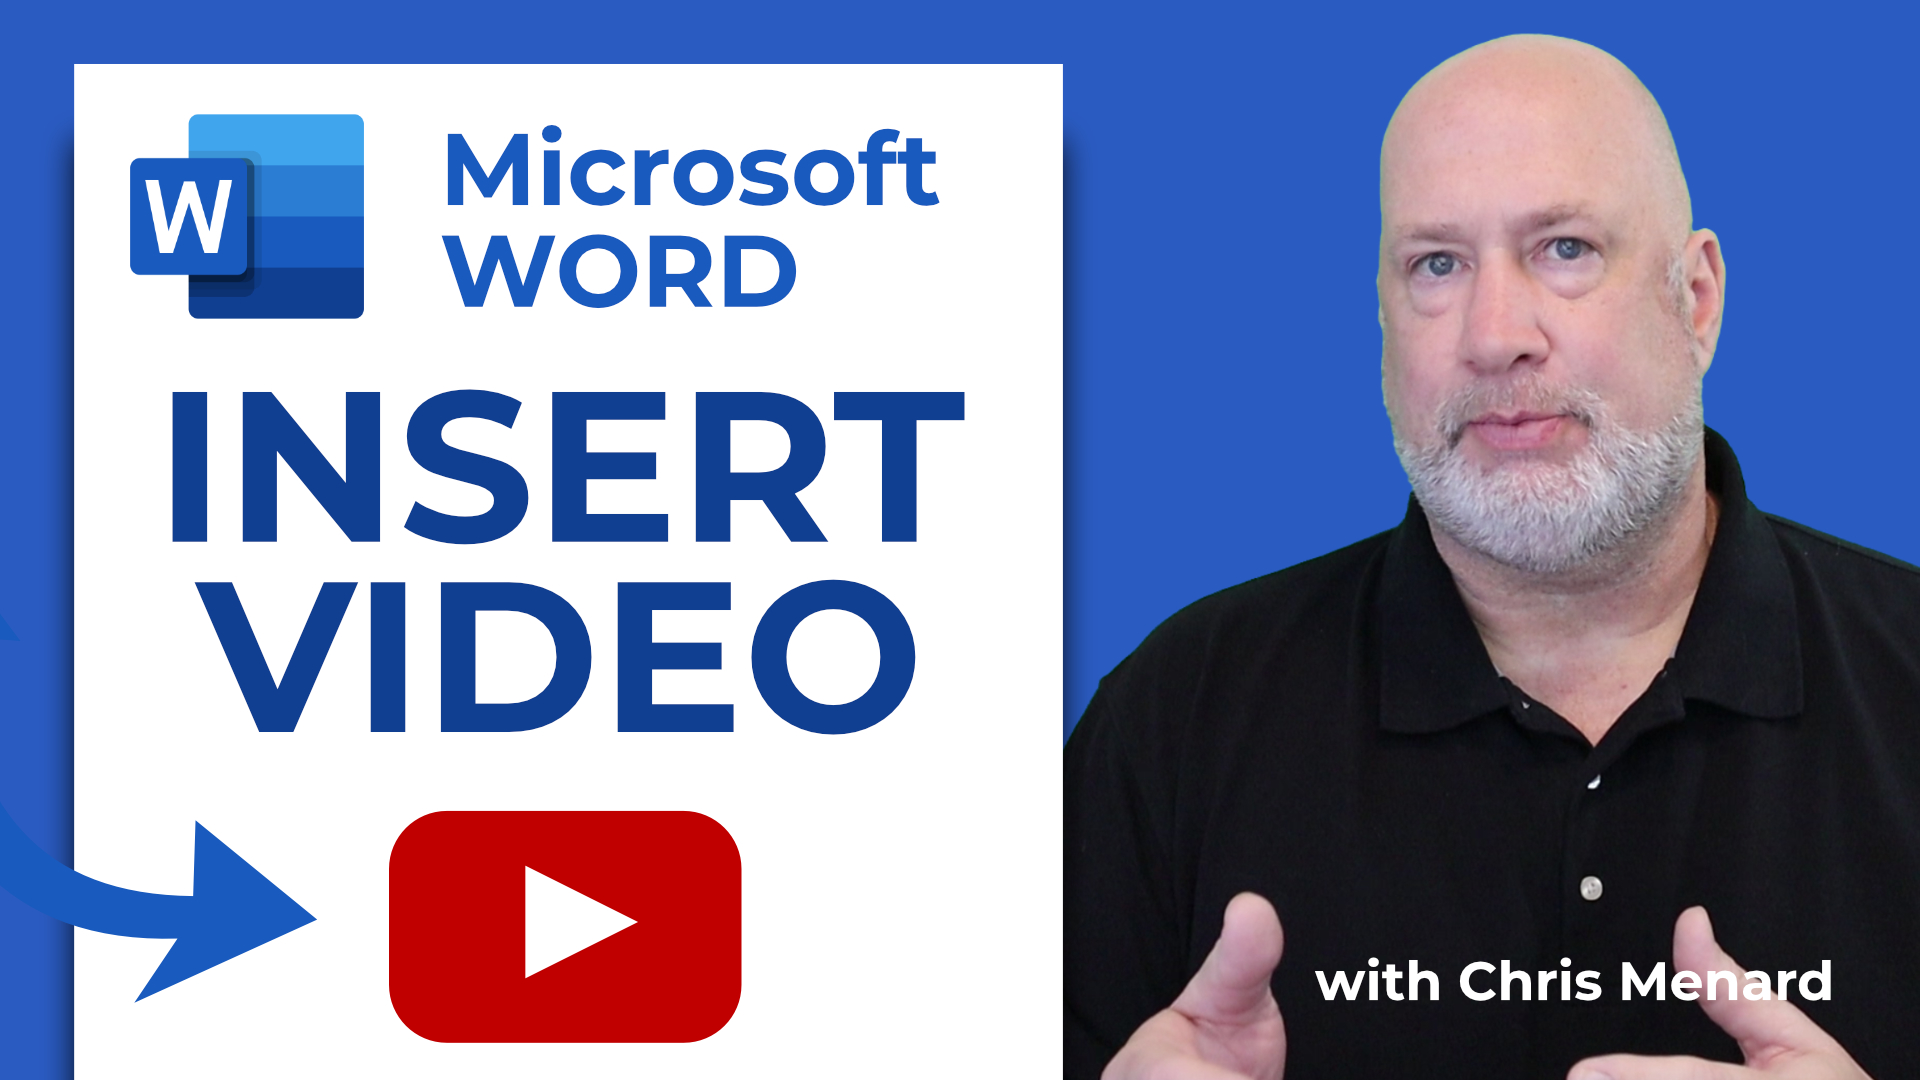 Insert Online Videos in Microsoft Word and Troubleshooting Tips